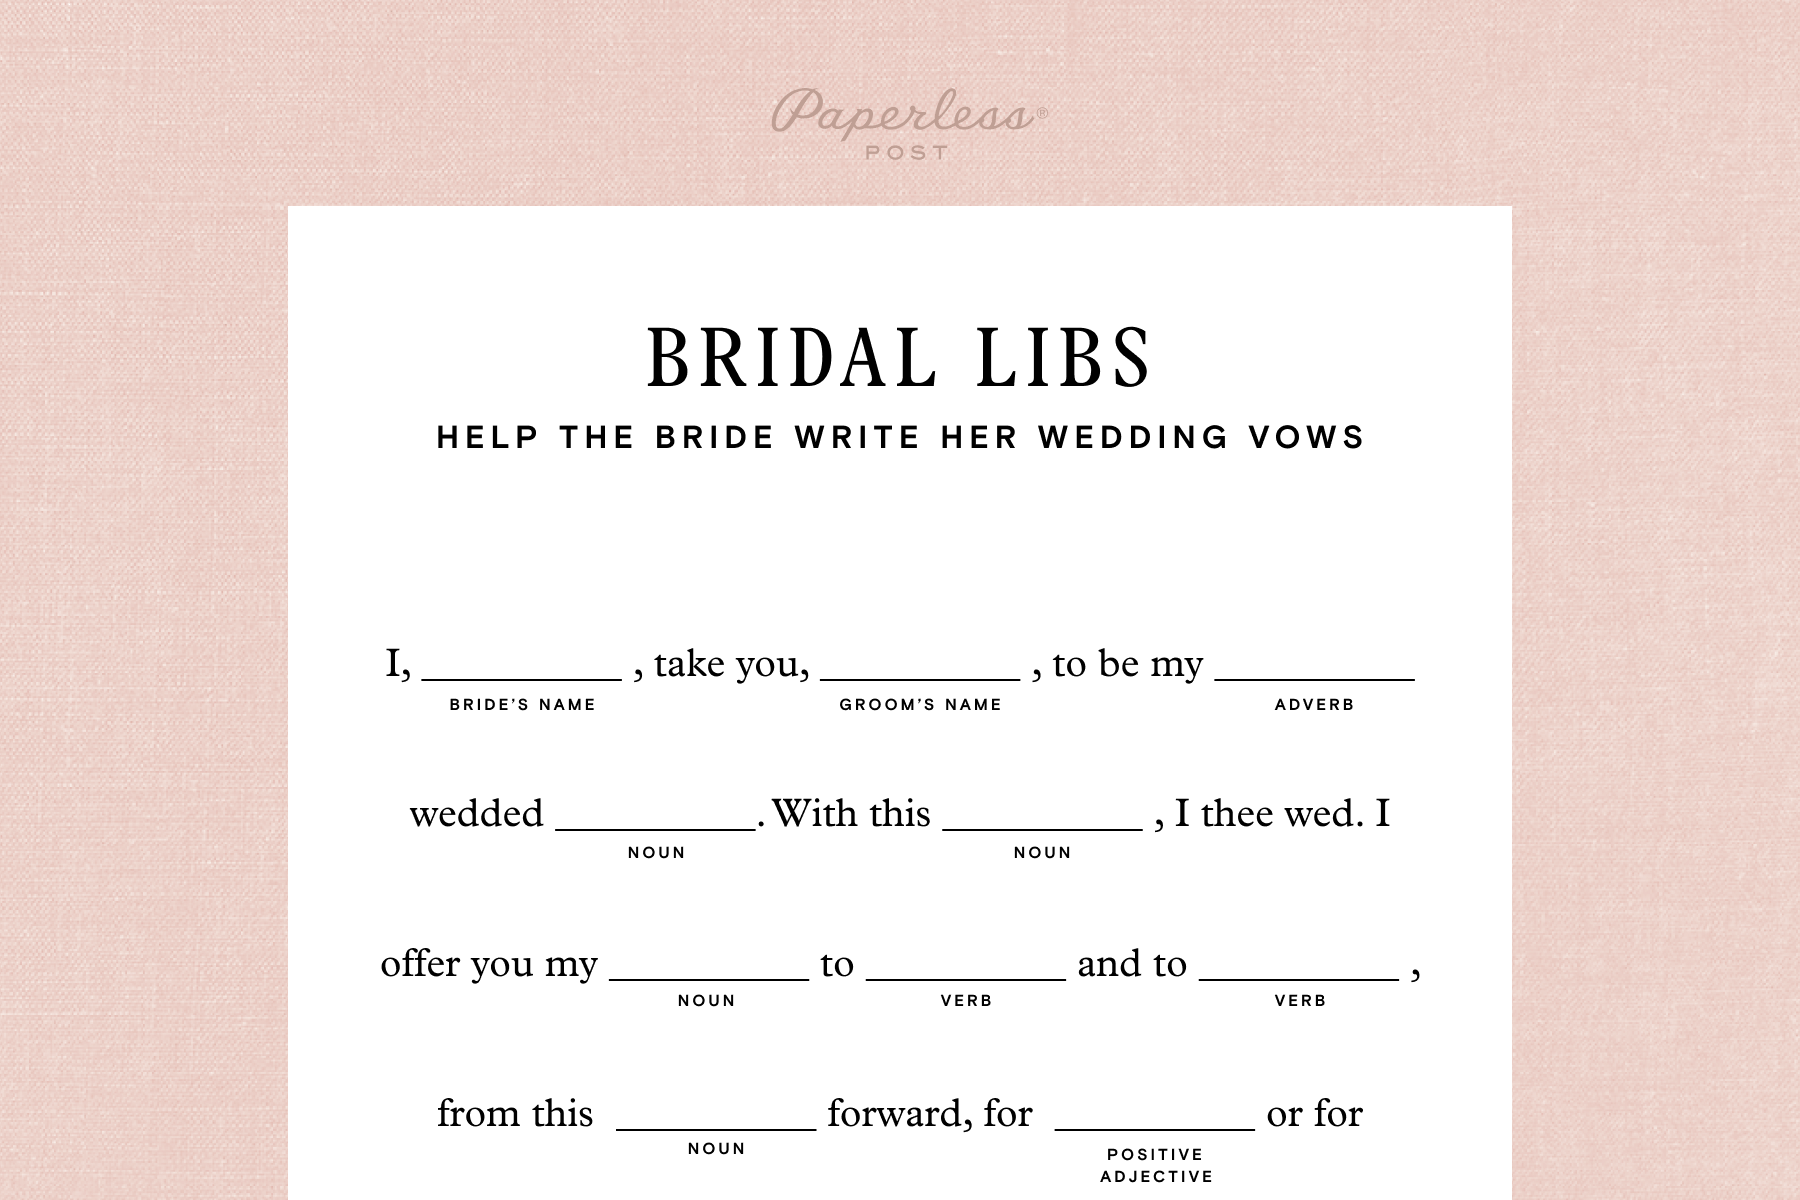 The top half of a sheet of paper with the phrase “Bridal Libs - Help the bride write her wedding vows” on top and a fill-in-the-blank vow template below.